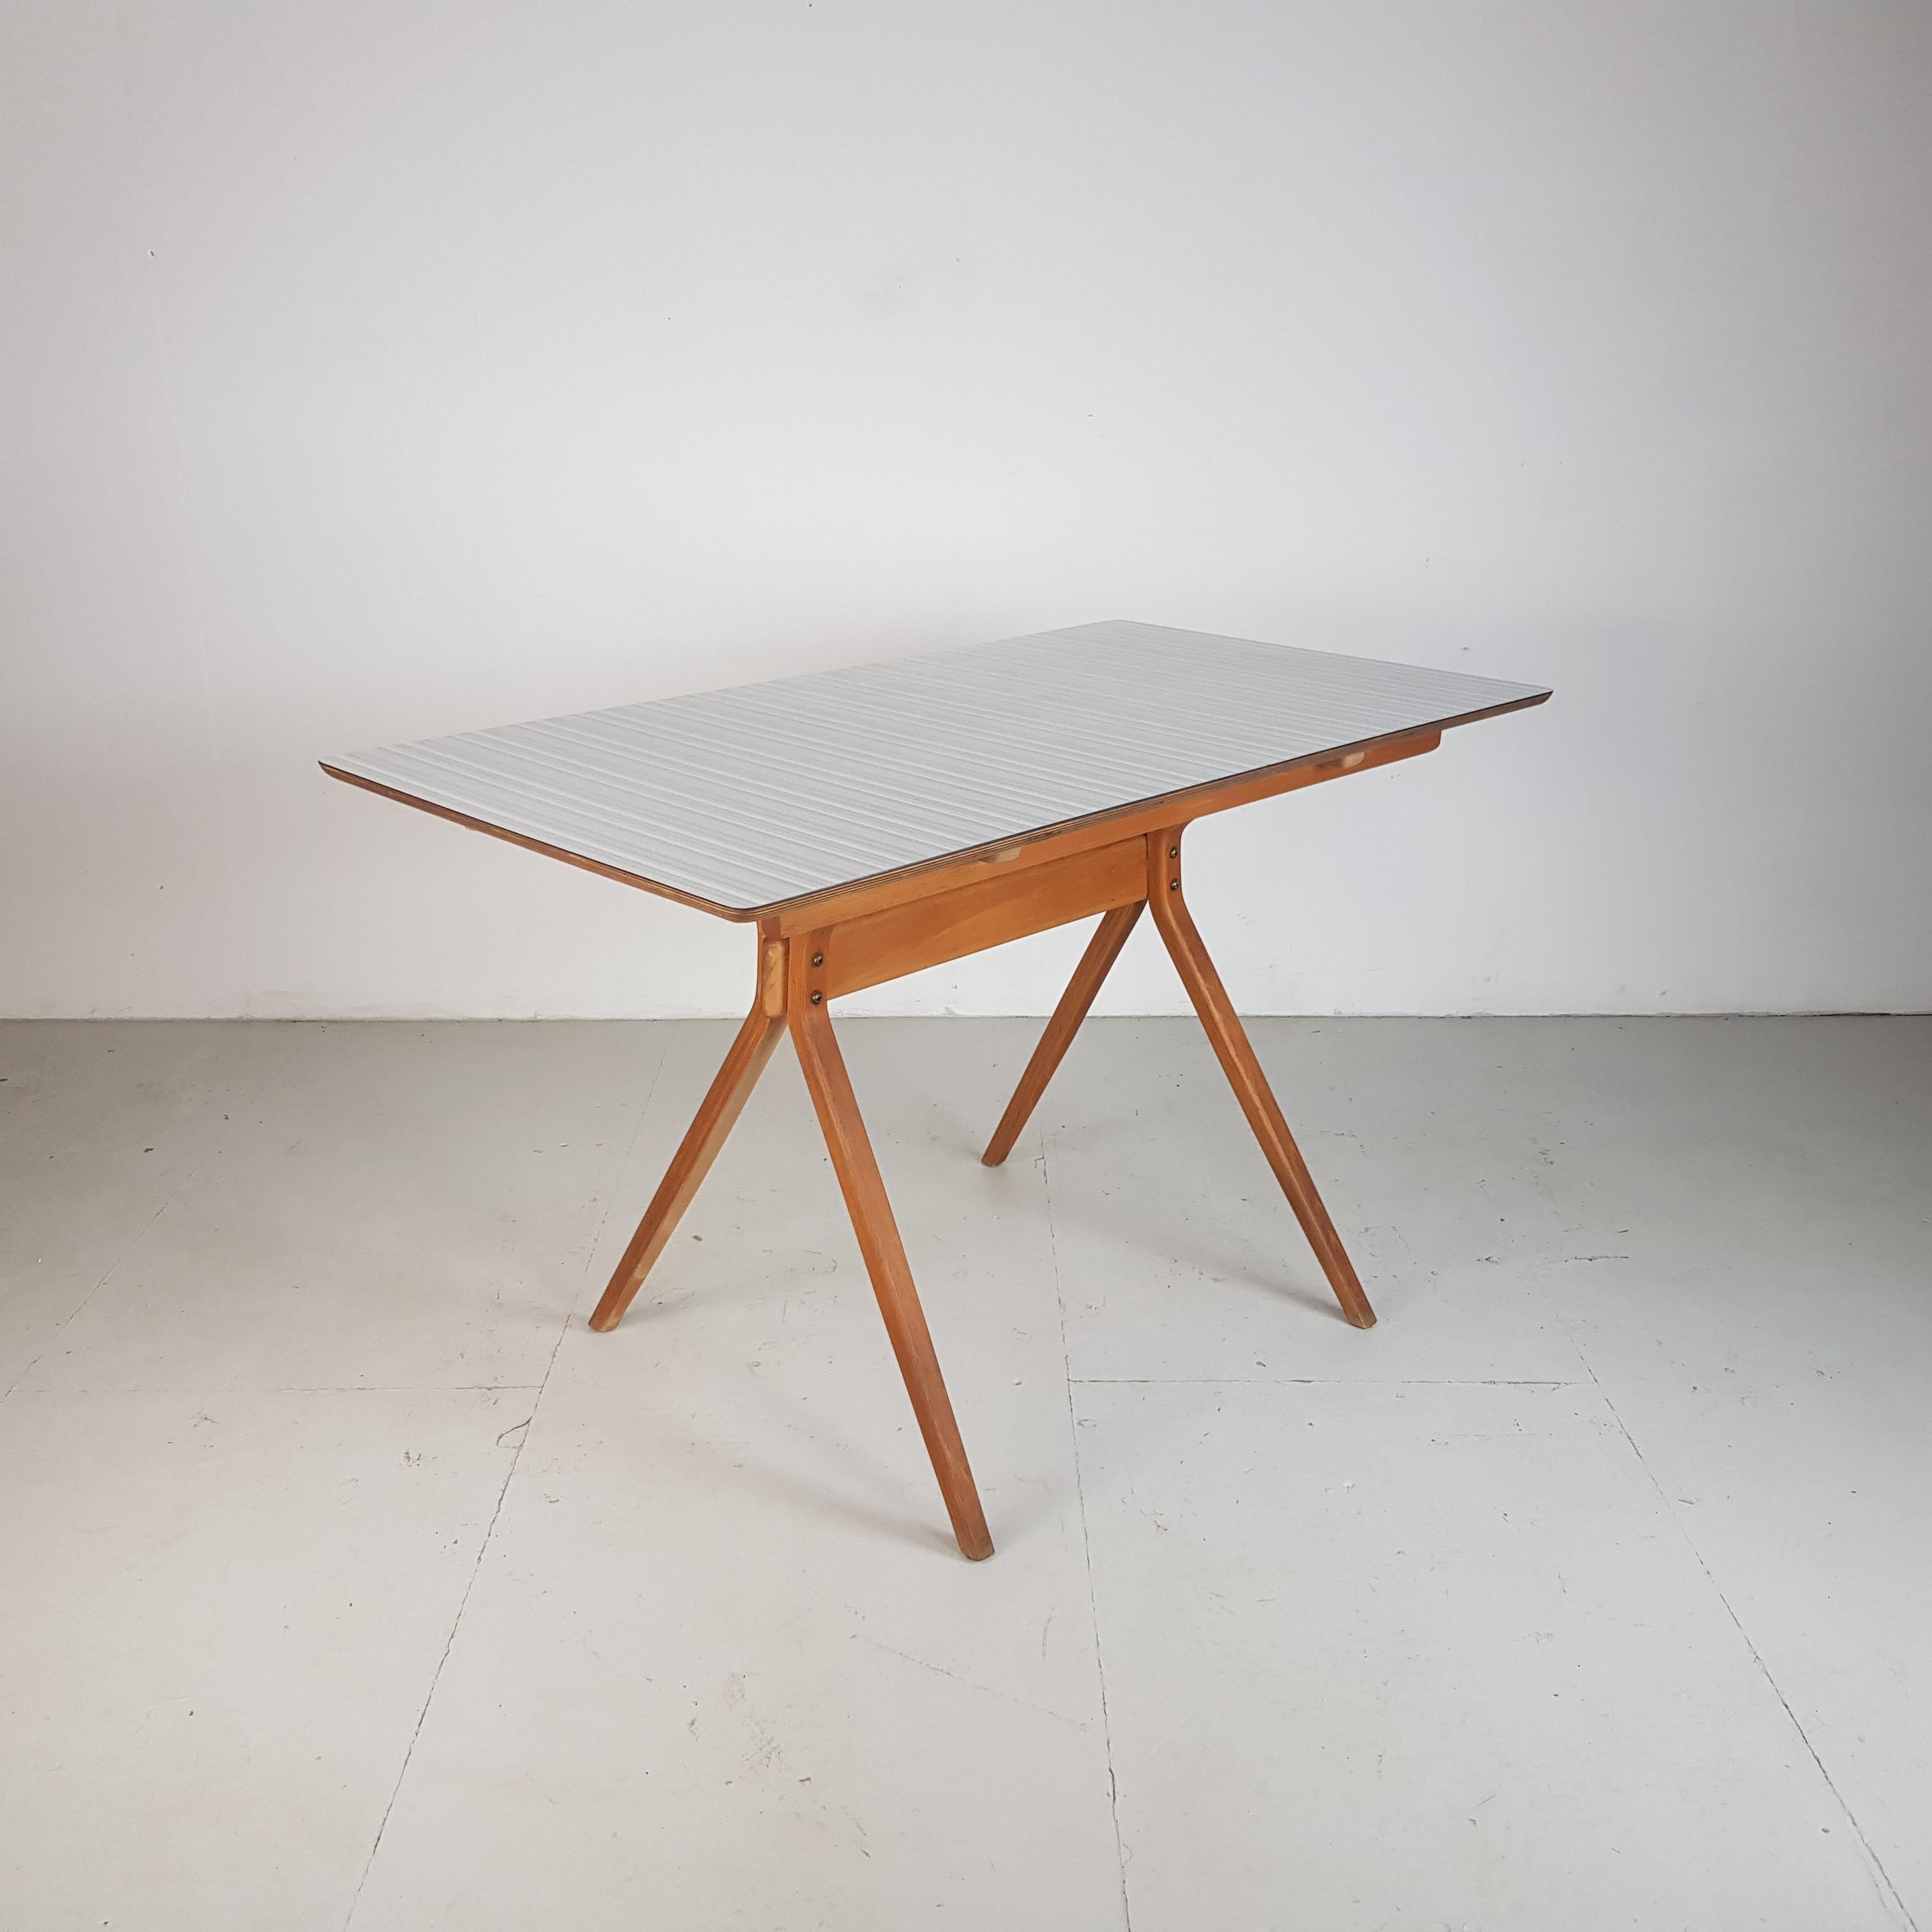 Lovely rectangular table with grey striped formica top made in the 1950s by Kandya. Nice in a kitchen, or would make a great desk.

Beech ply frame and legs.

Approximate dimensions:

Width 122cm

Depth 68cm

Height 74cm

In an overall